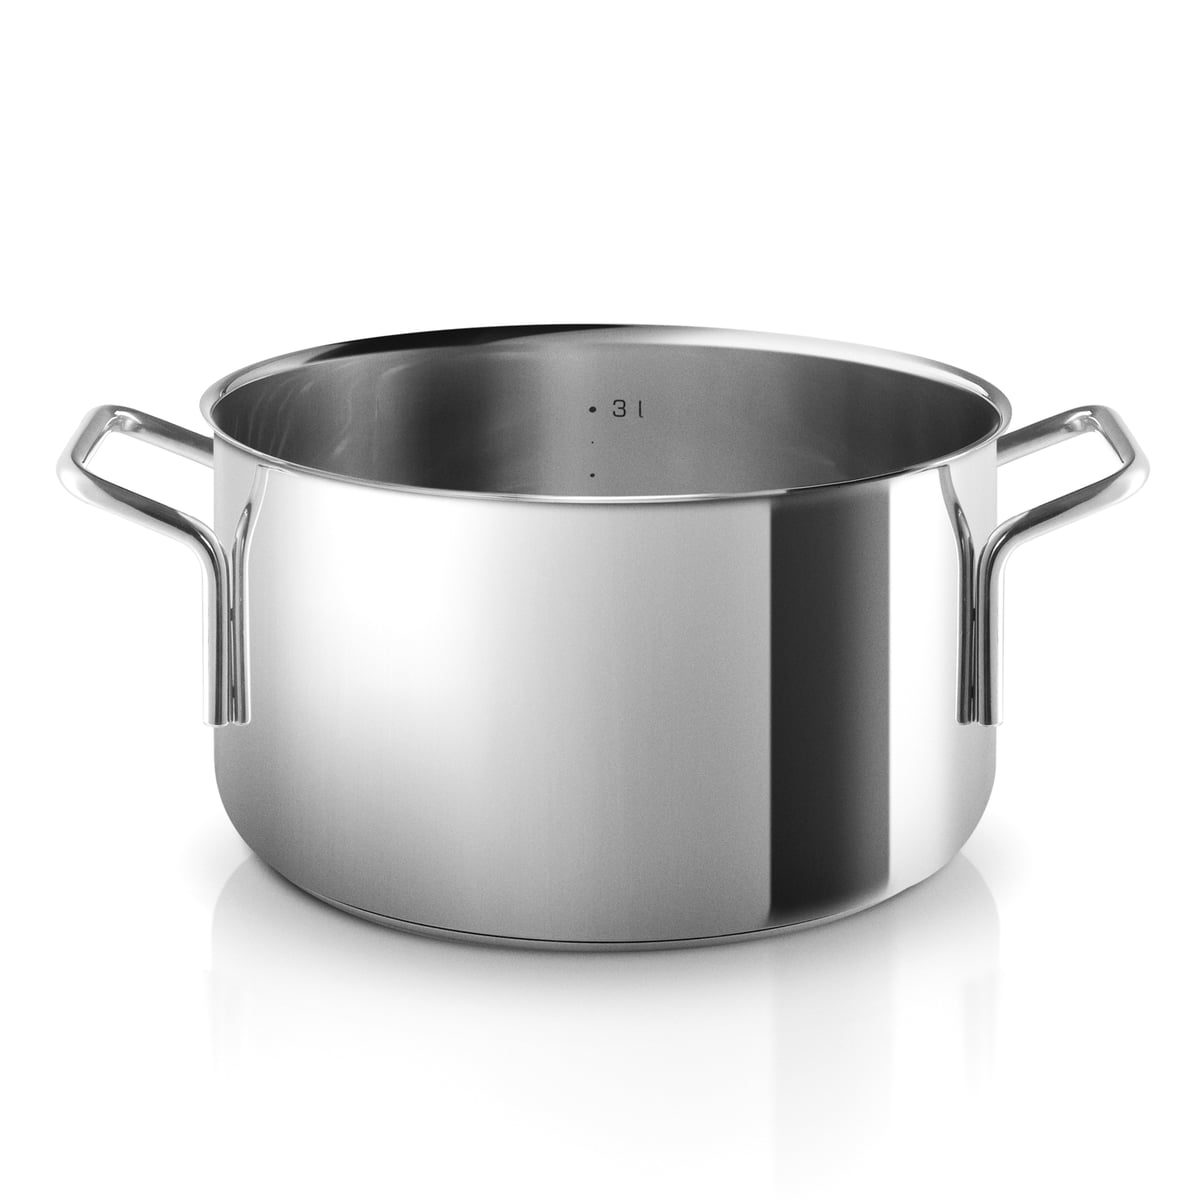 Stainless steel pot set by Eva Trio in our shop